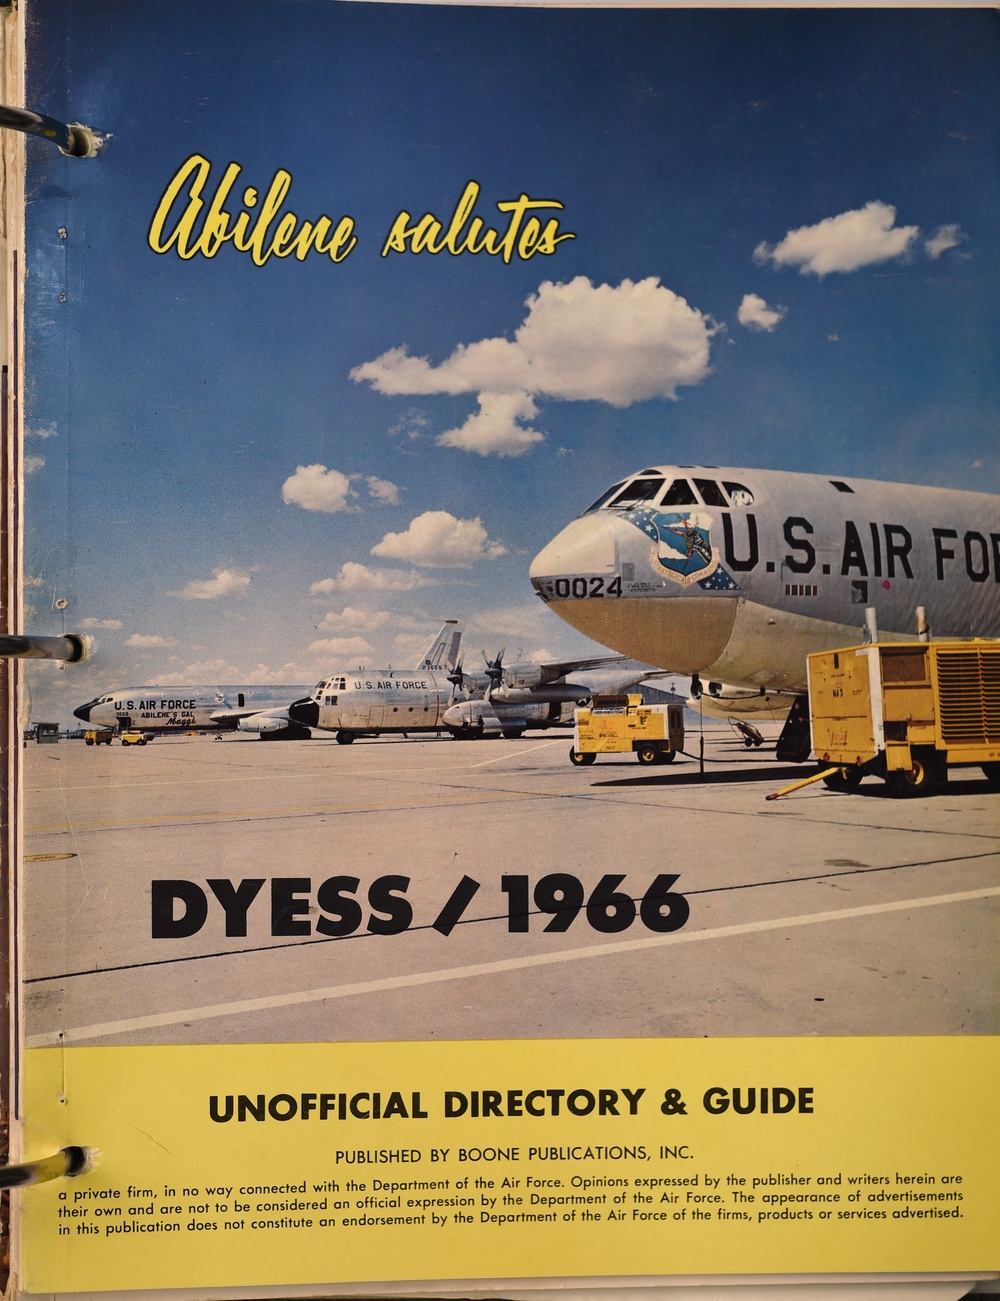 Dyess Air Force Base in the 1960s